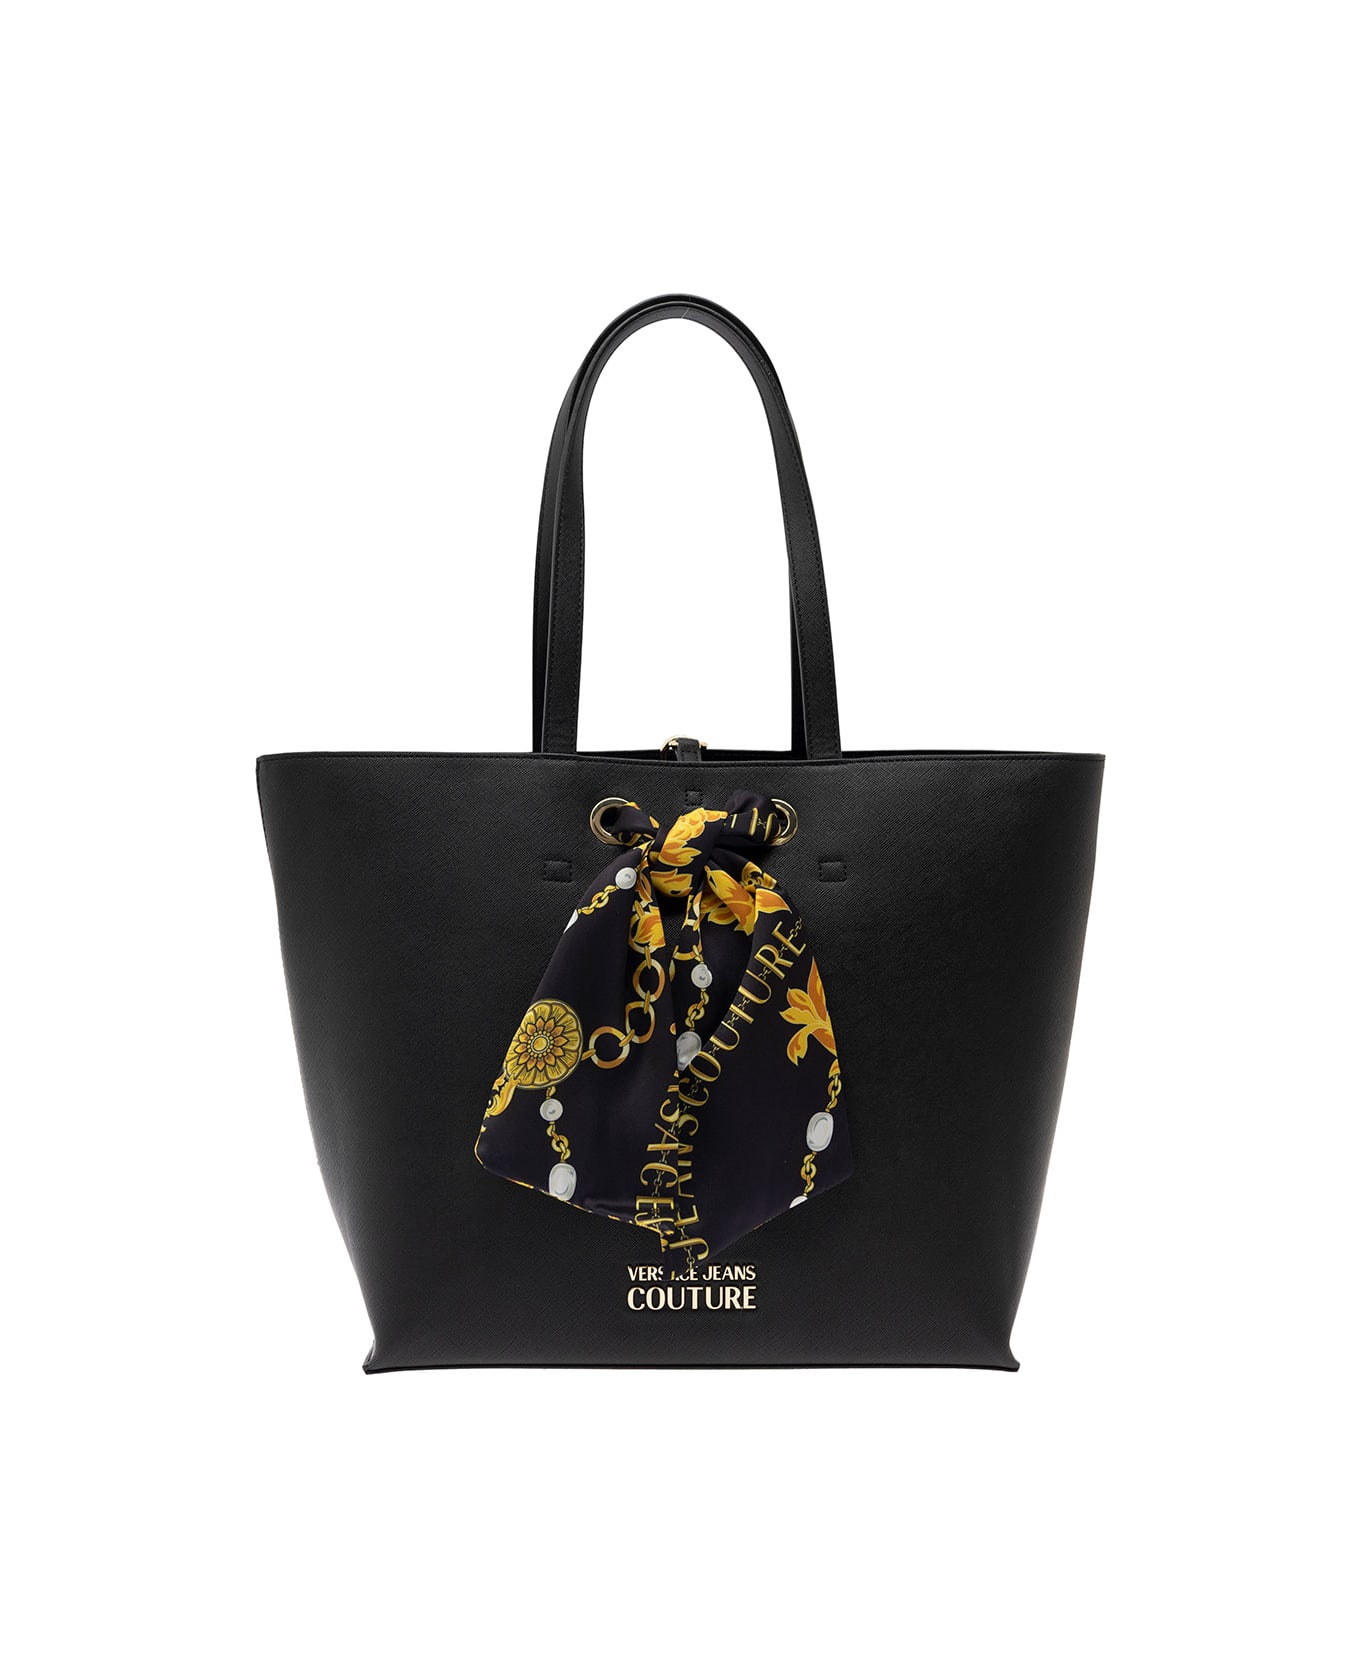 Versace Jeans Couture Thelma Classic Shopping Bag - BLACK